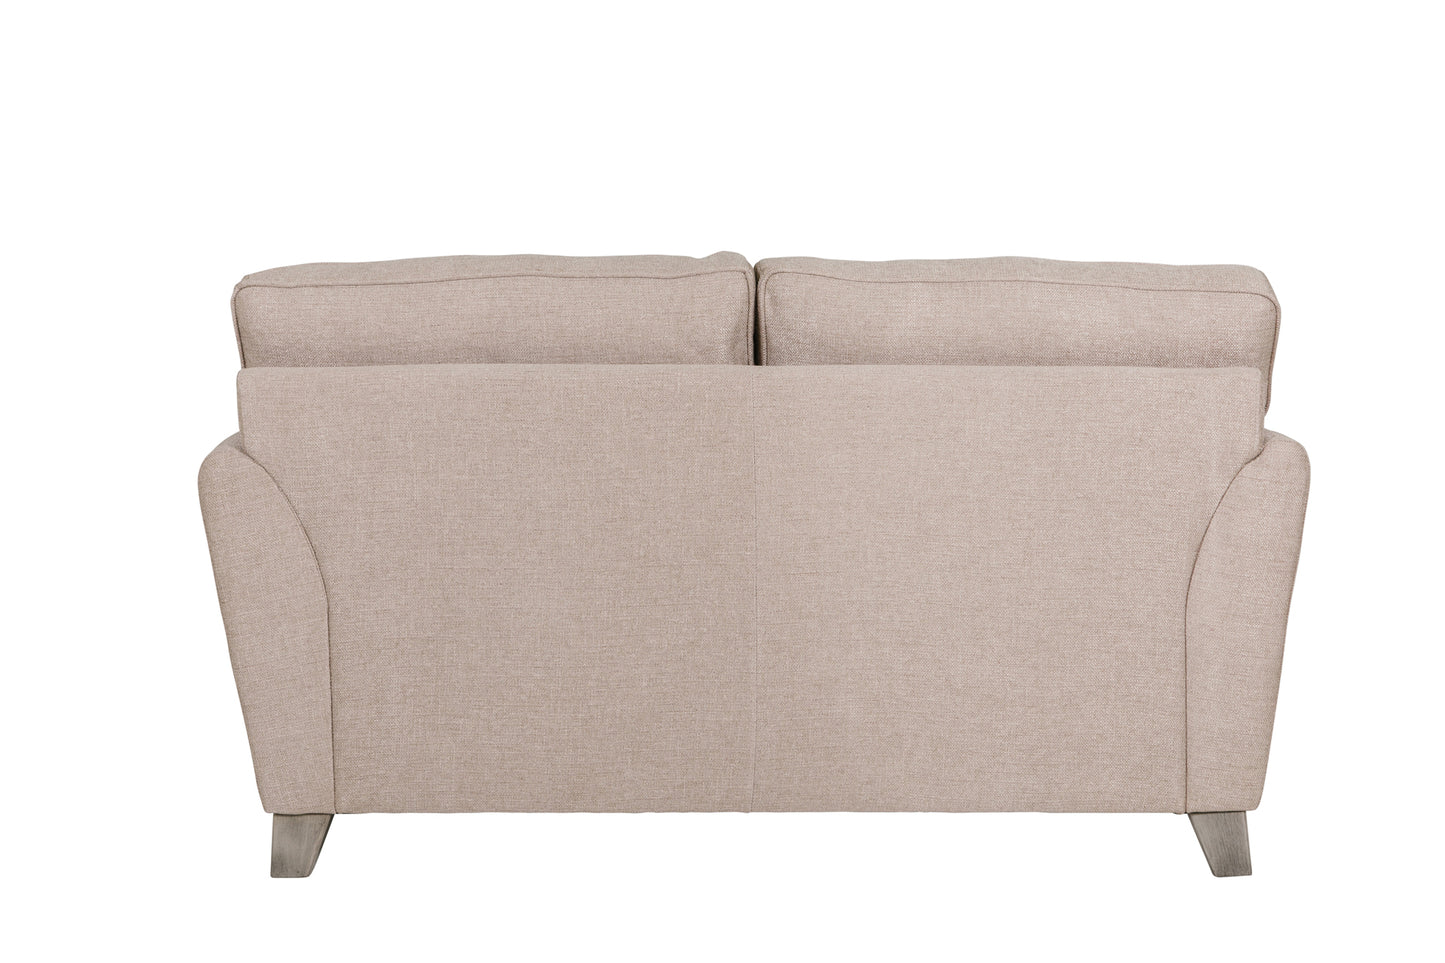 Cantrell 2 Seater Sofa - Biscuit